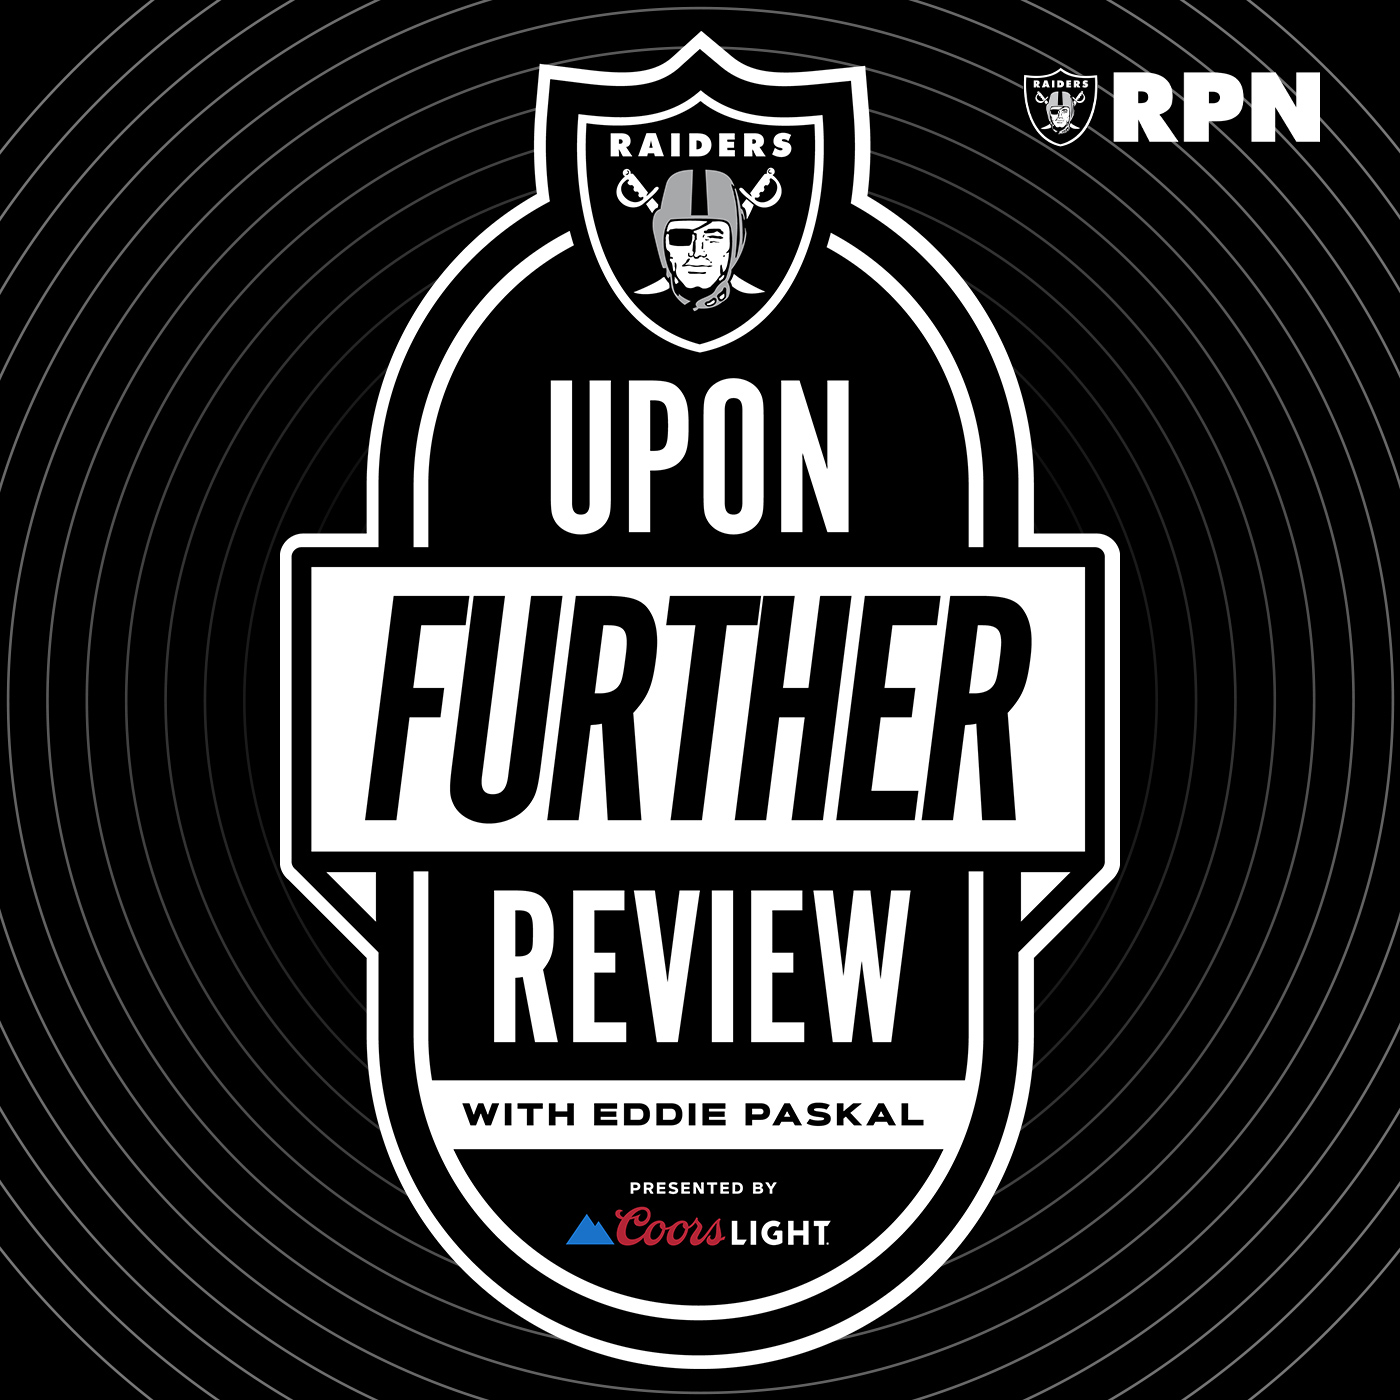 Pro Bowl Games, NFL Honors and more key offseason events to keep an eye on | UFR